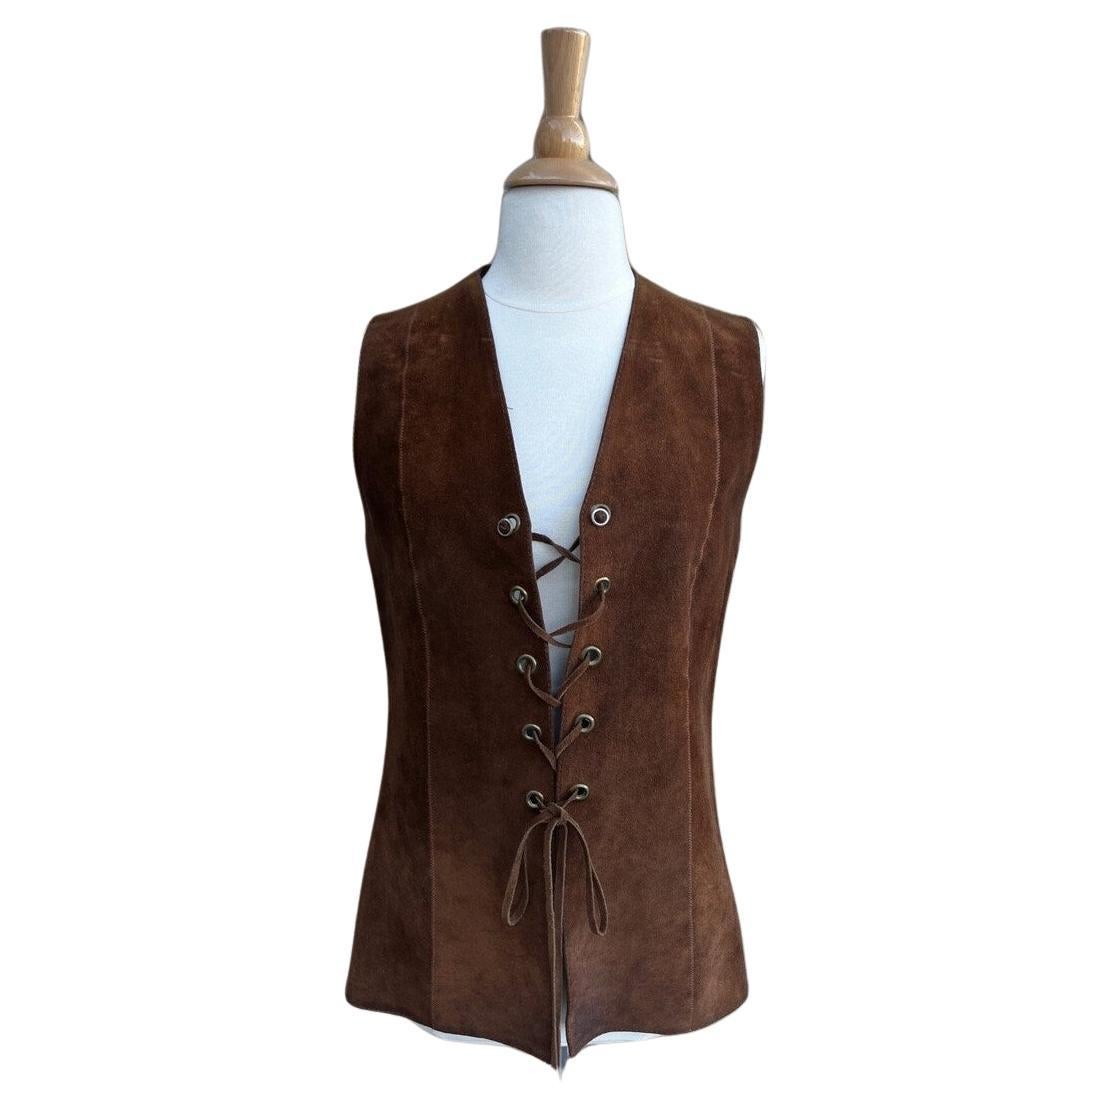 Susan Small Brown Suede Leather Vest, Circa 1960s For Sale